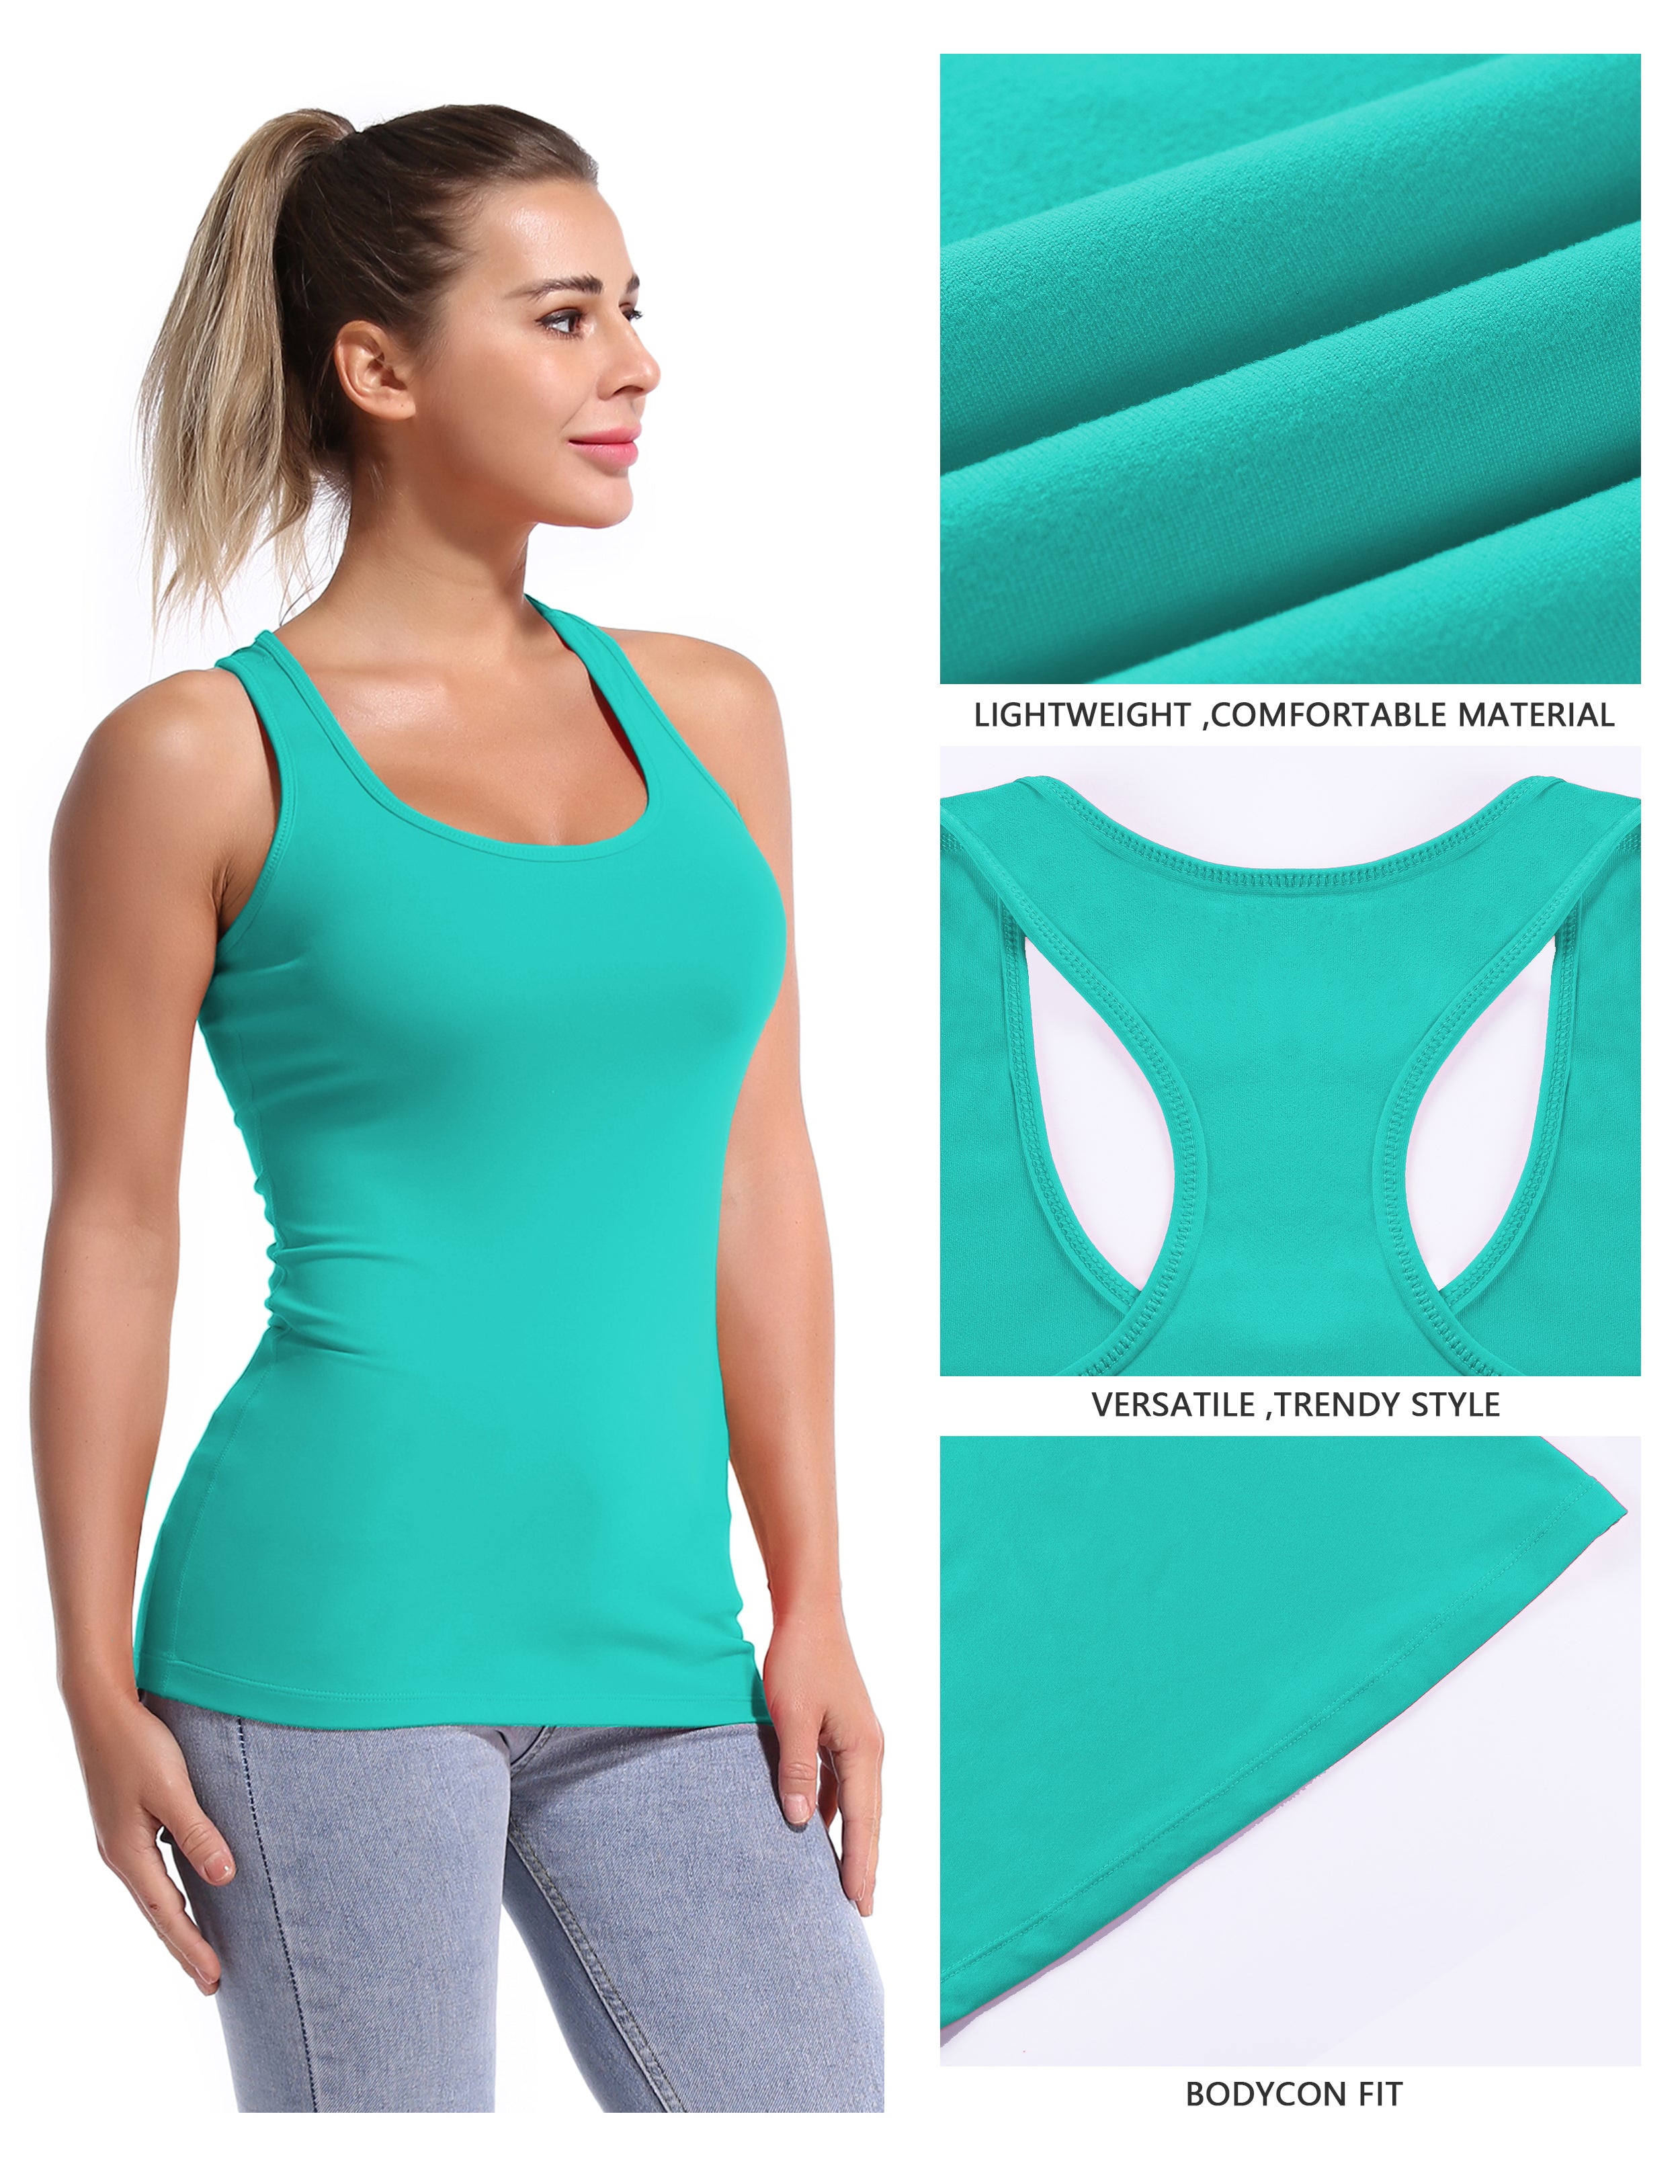 Racerback Athletic Tank Tops cyan 92%Nylon/8%Spandex(Cotton Soft) Designed for Tall Size Tight Fit So buttery soft, it feels weightless Sweat-wicking Four-way stretch Breathable Contours your body Sits below the waistband for moderate, everyday coverage